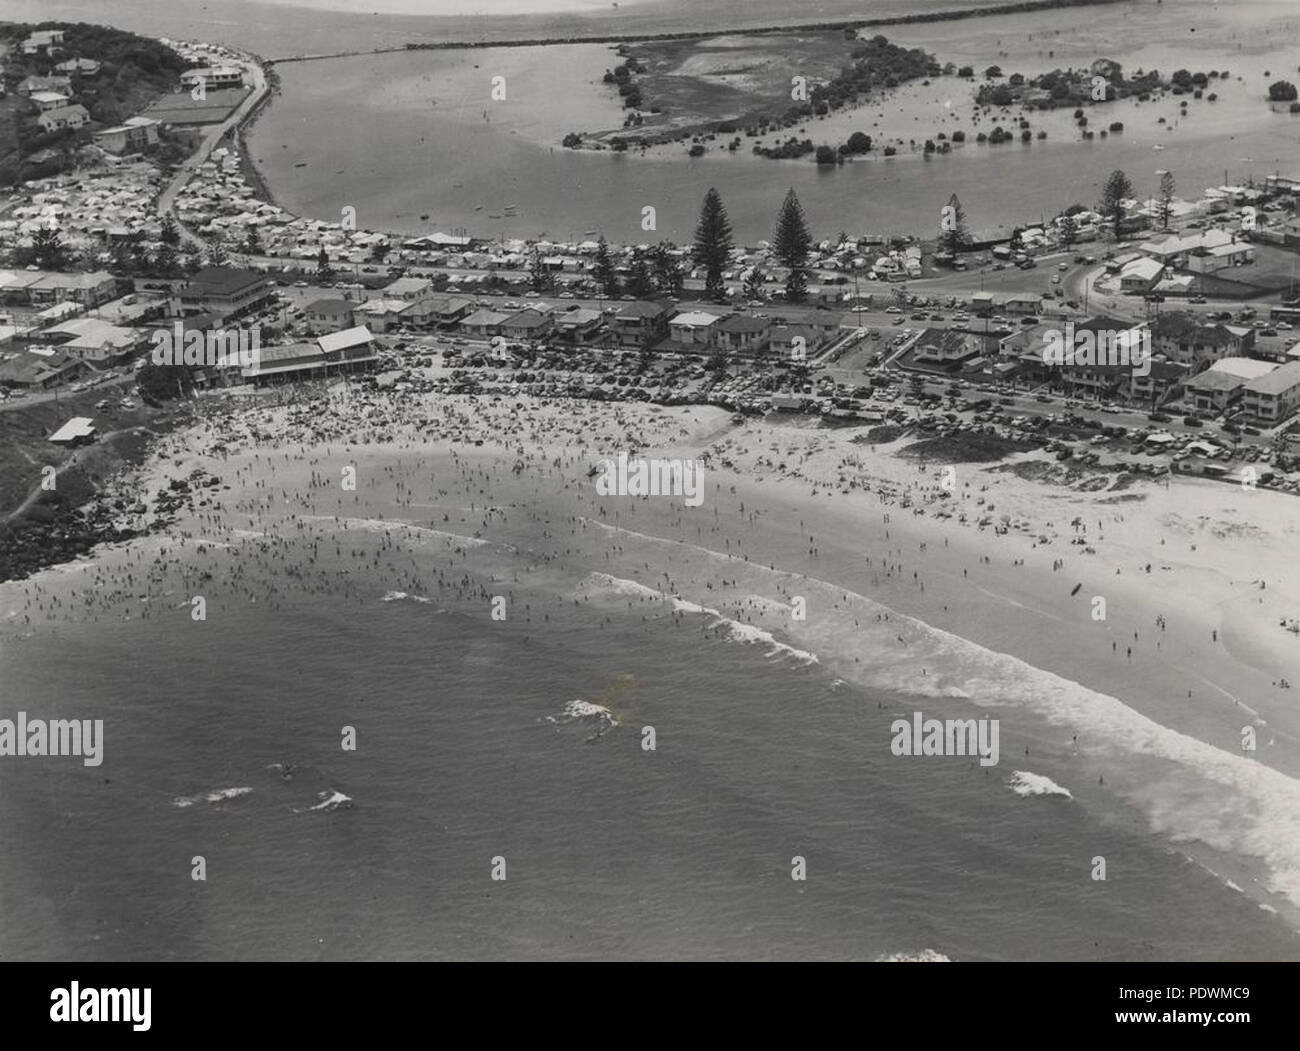 257 StateLibQld 1 253554 Greenmount Beach and Tweed River from the air, Gold Coast, ca. 1955 Stock Photo